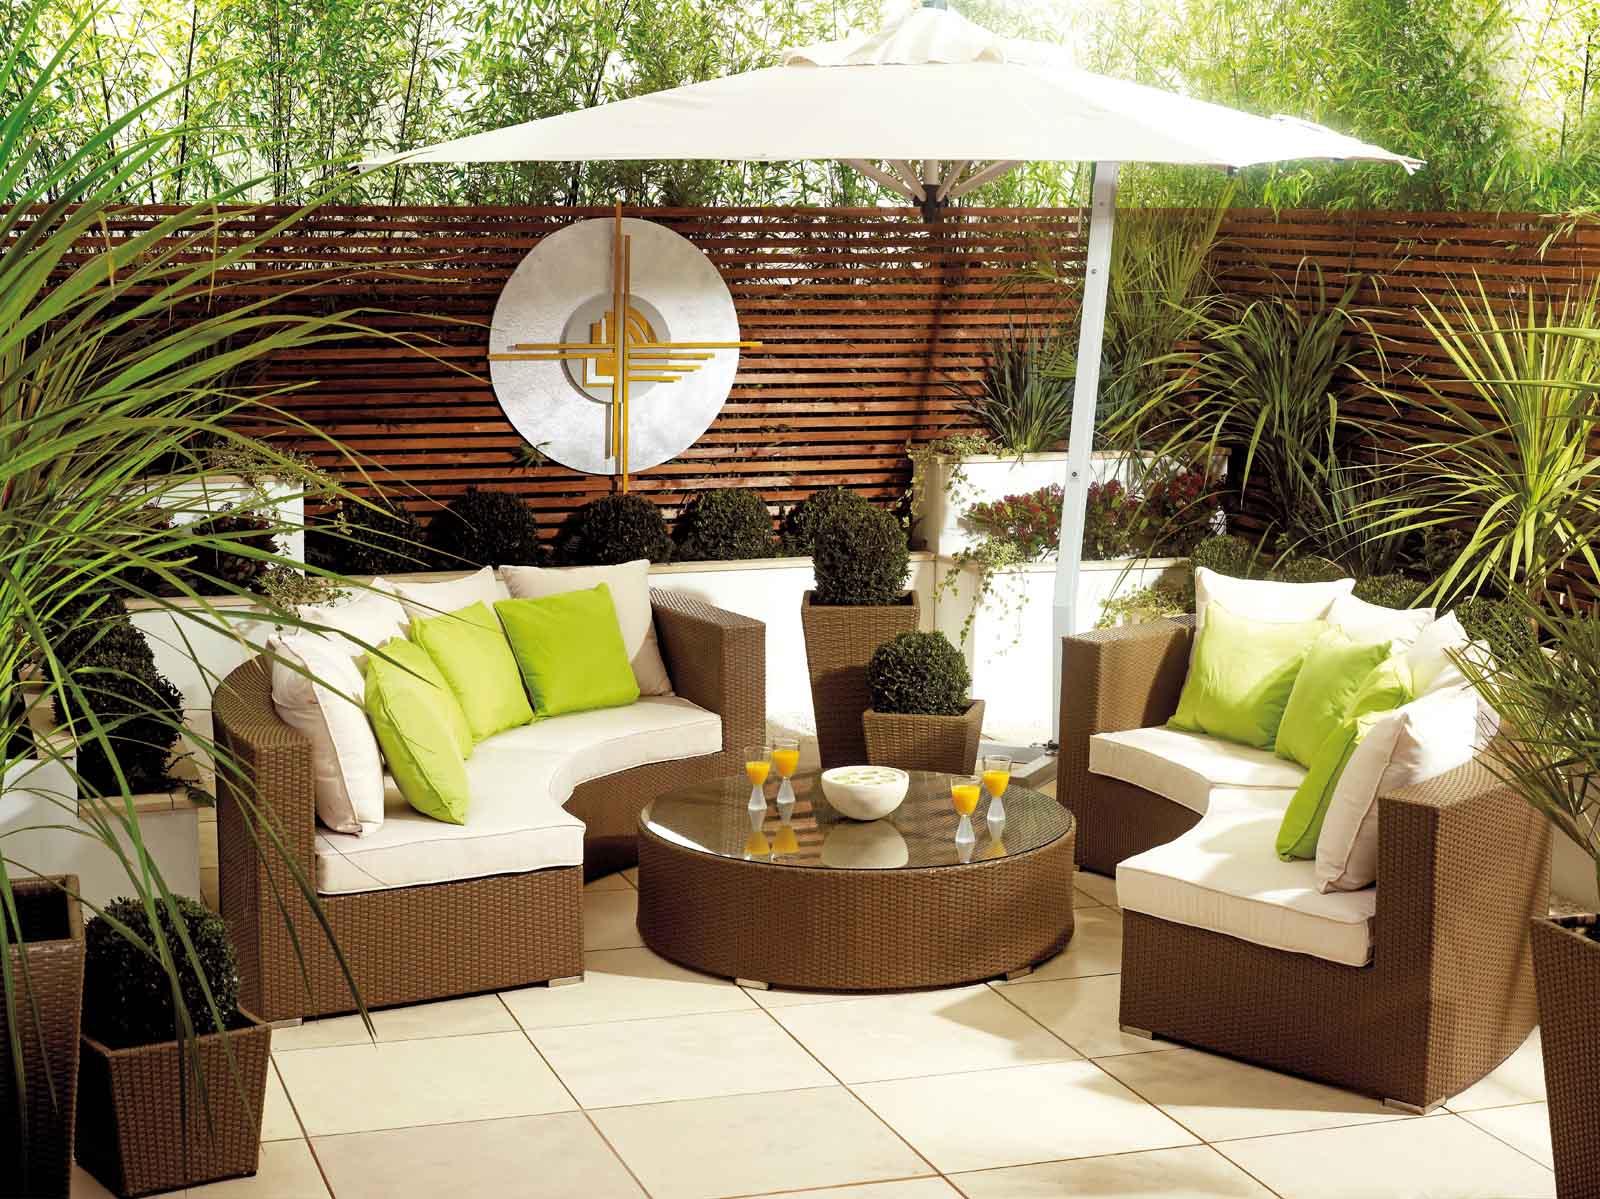 How To Properly Store And Care For Your Garden Furniture